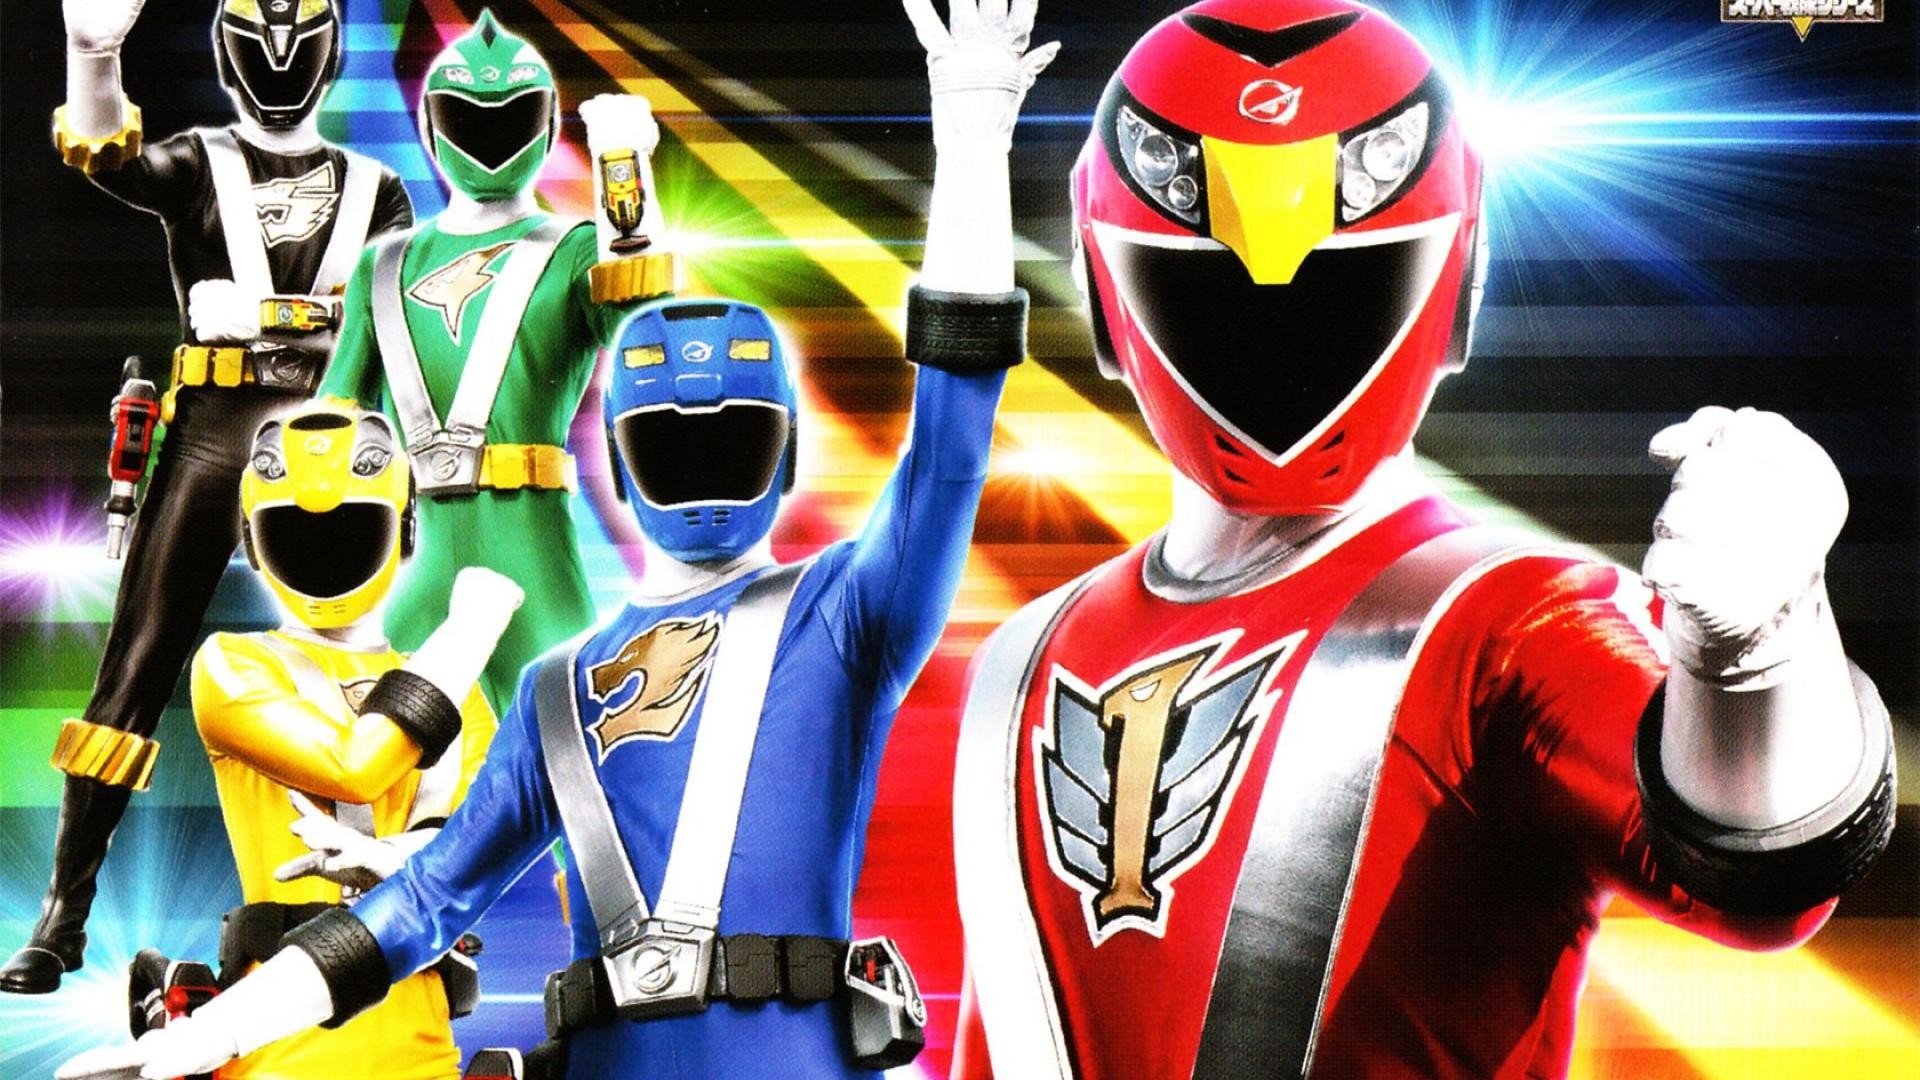 1920x1080 Mighty Morphin Power Rangers Wallpapers HD Wallpapers 1680Ã1050 Power  Rangers Backgrounds (38 Wallpapers